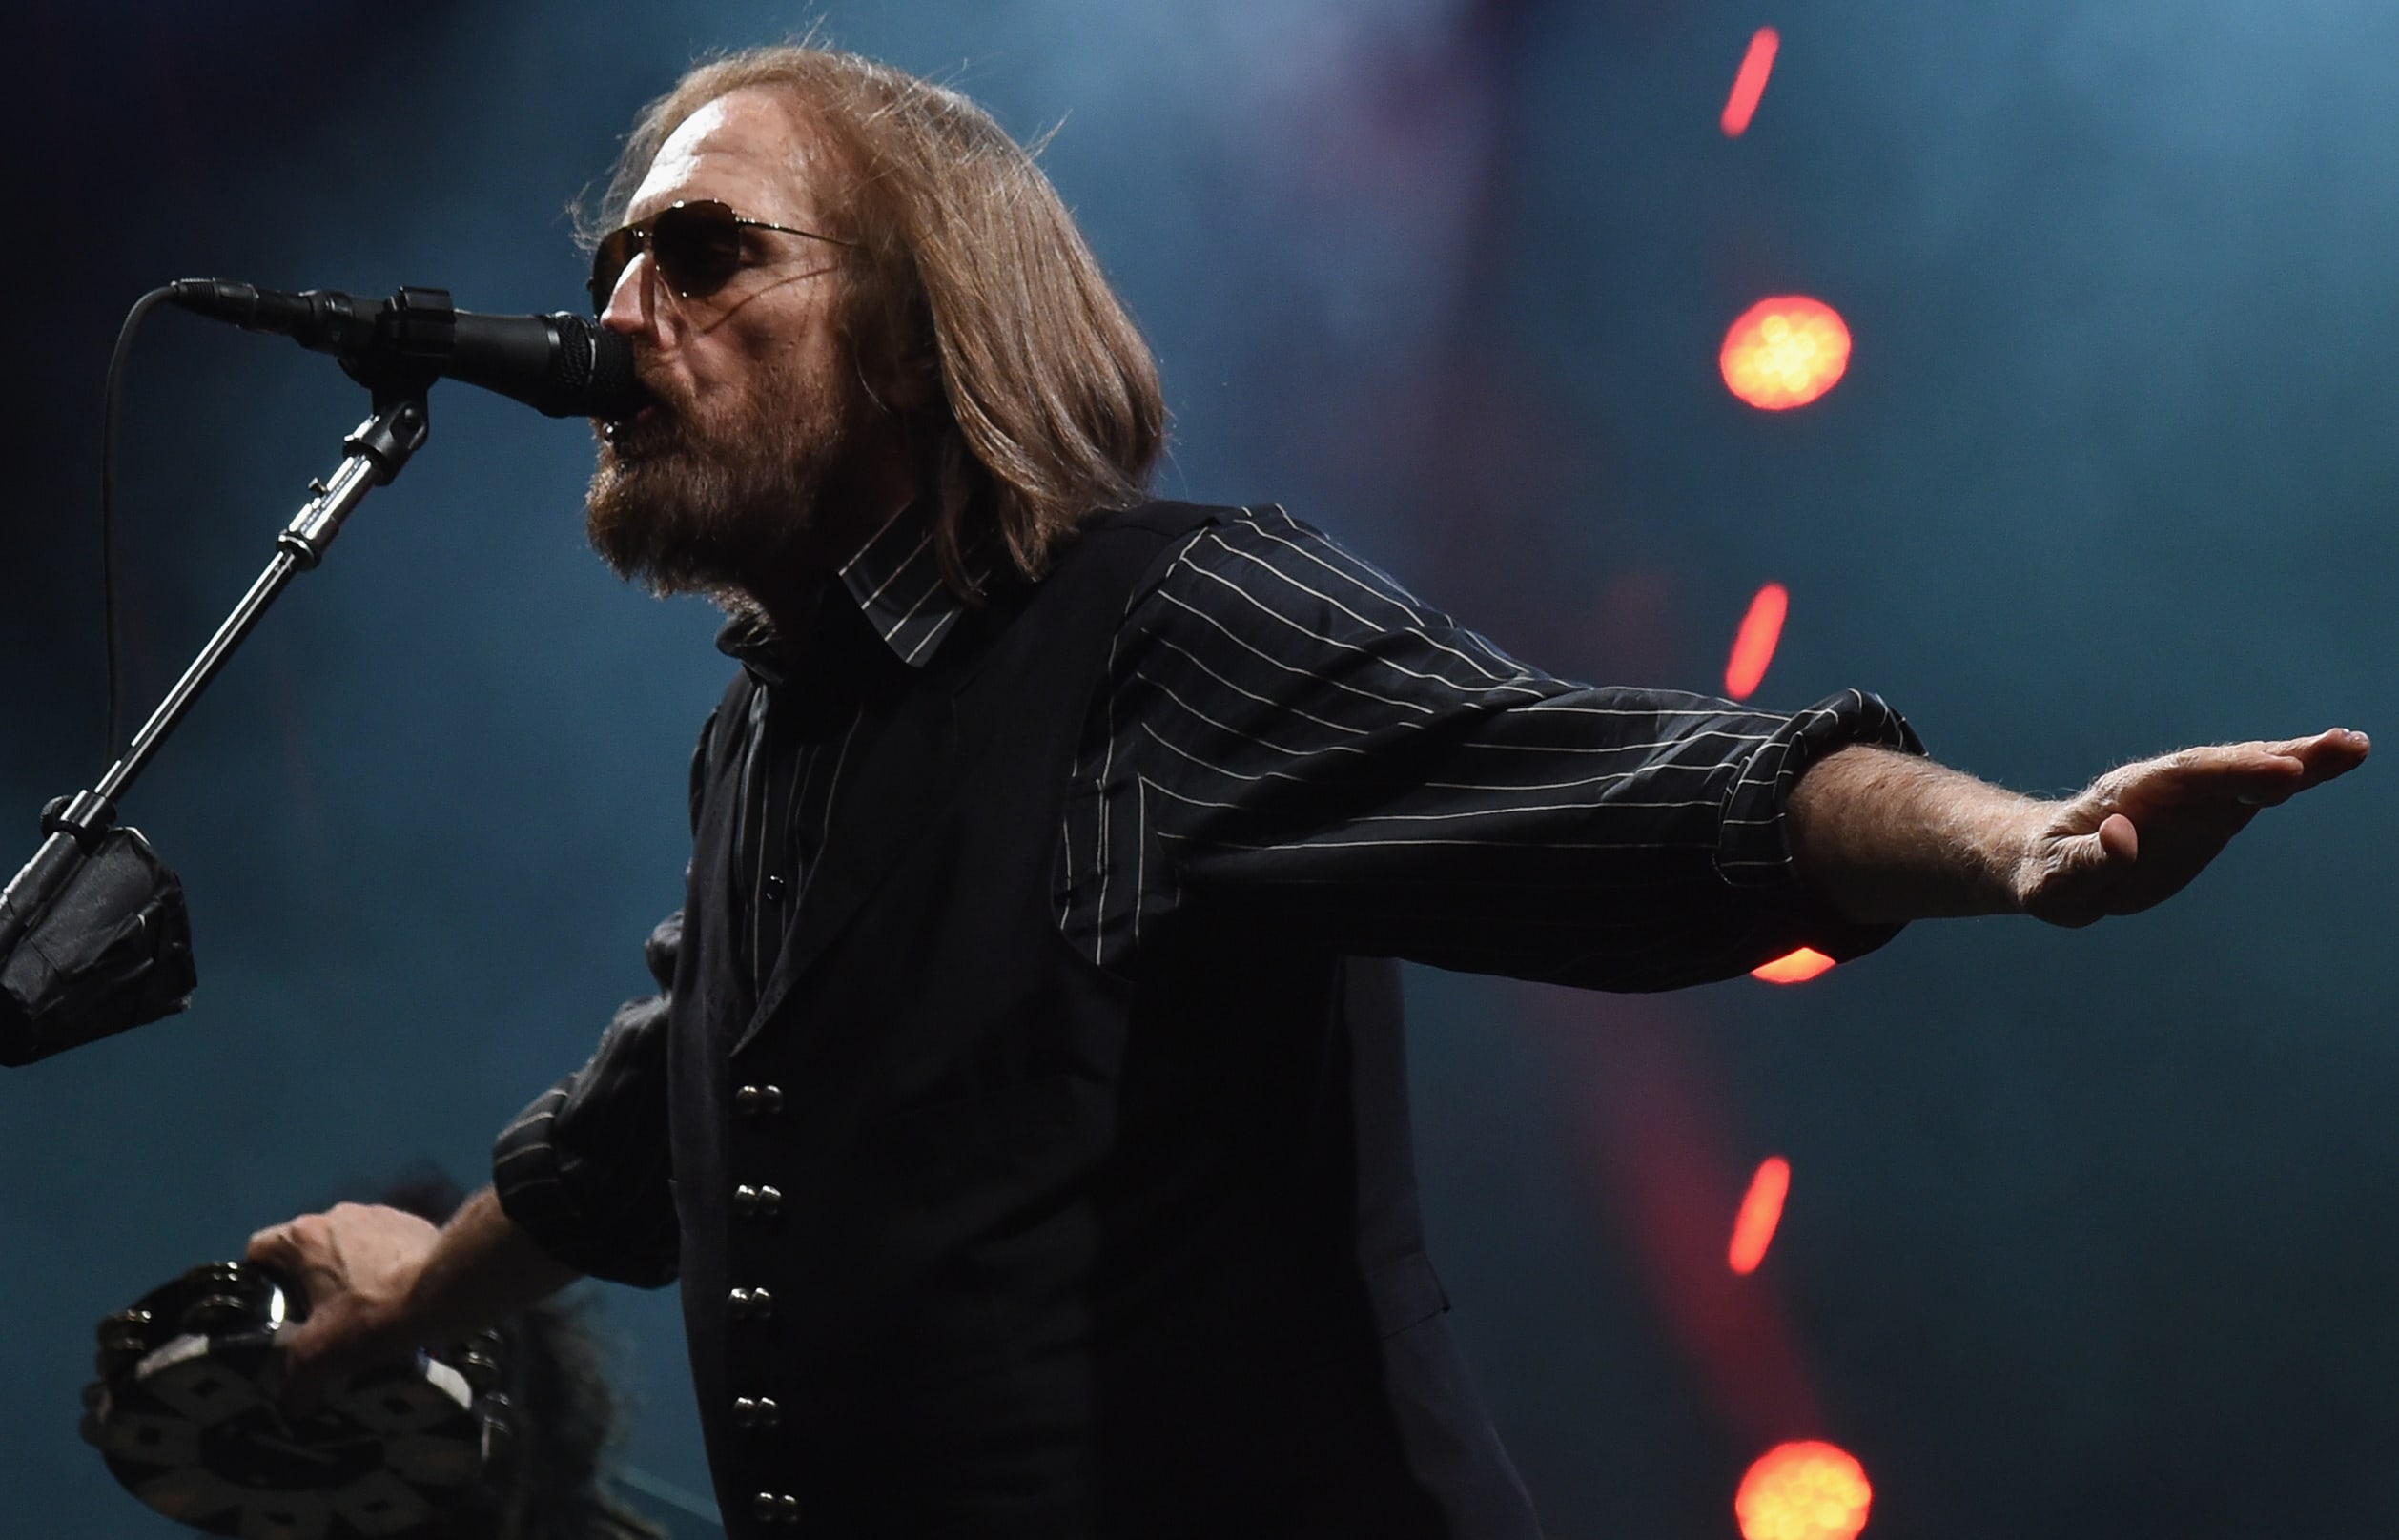 Tom Petty performs with Tom Petty and the Heartbreakers during their 40th Anniversary Tour in Nashville, Tennessee, on April 25.